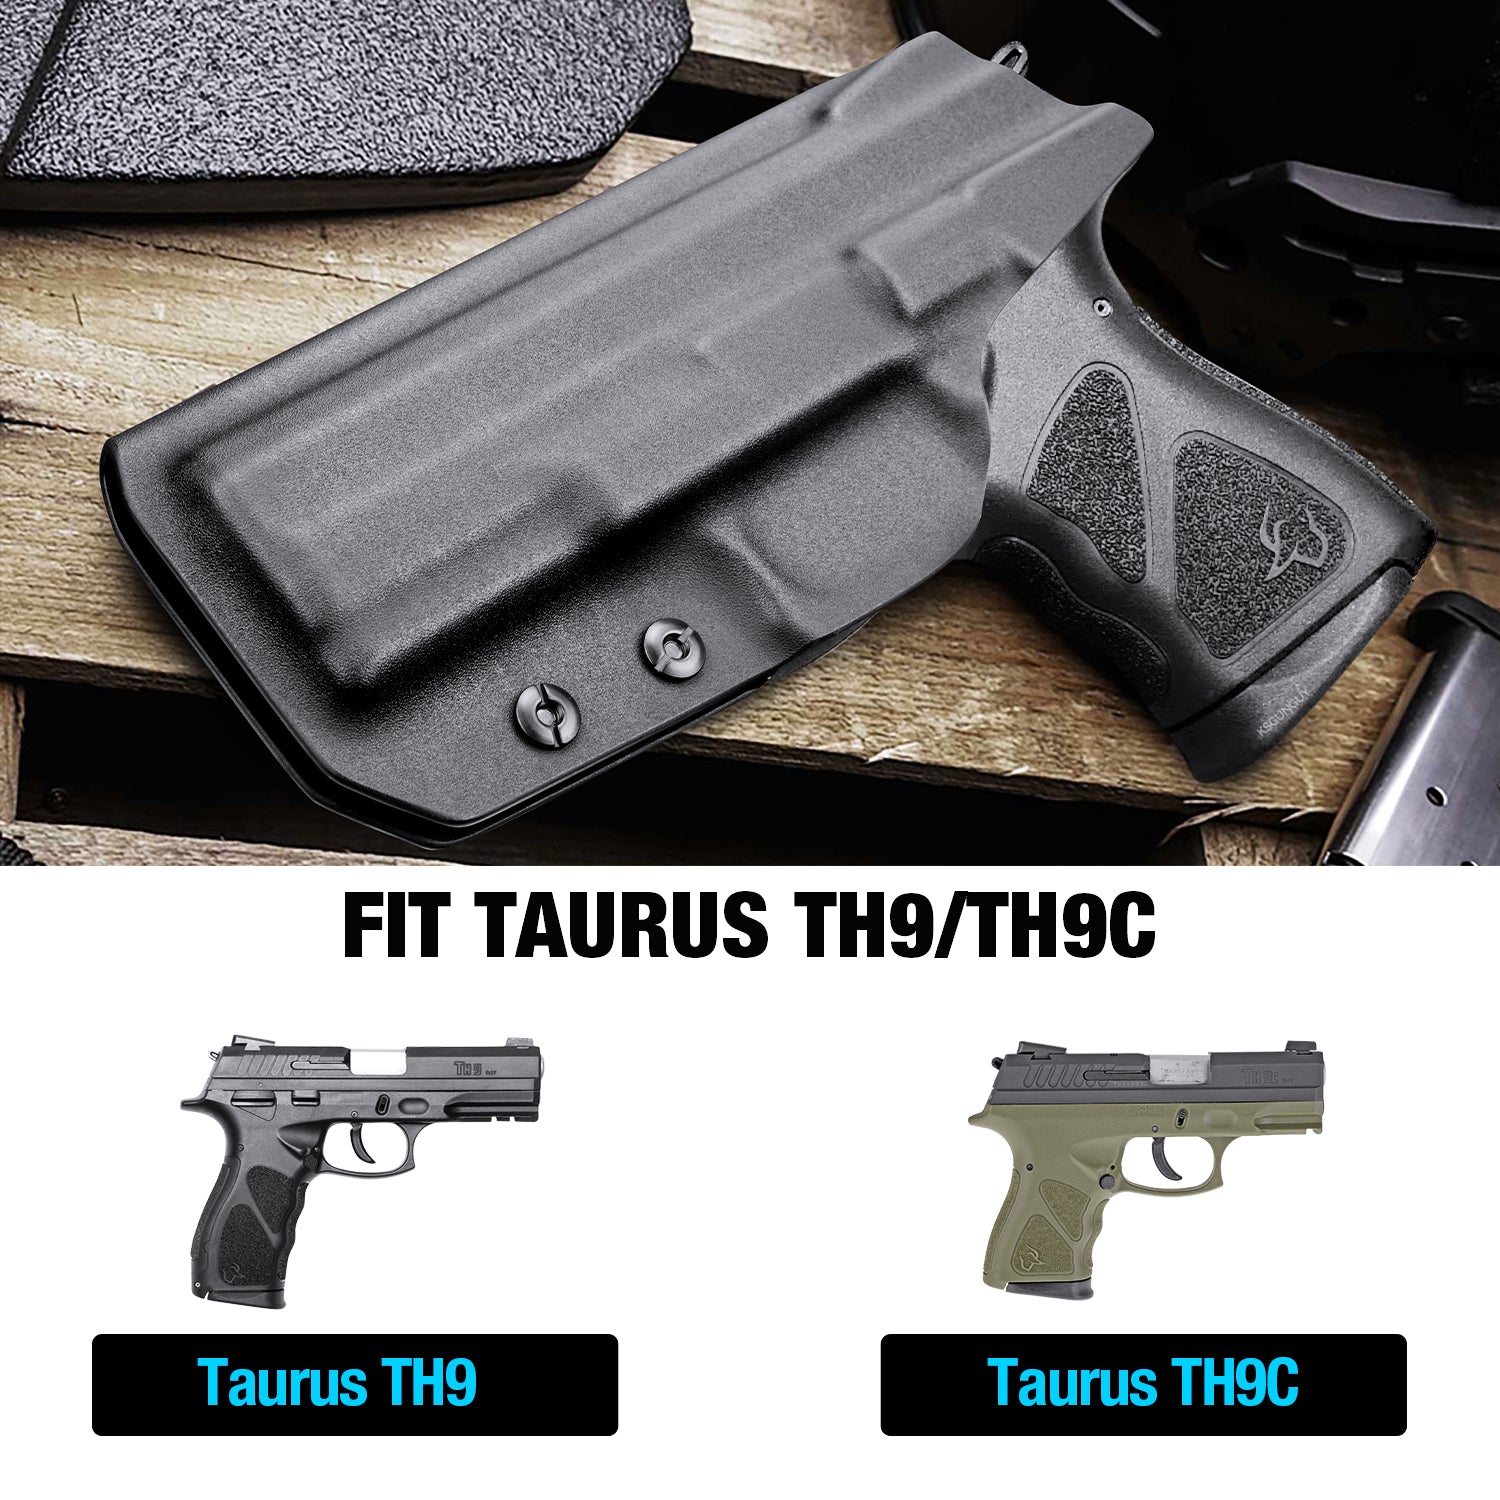 Taurus TH9 IWB Kydex Holster - Made in U.S.A. - Concealed Holsters